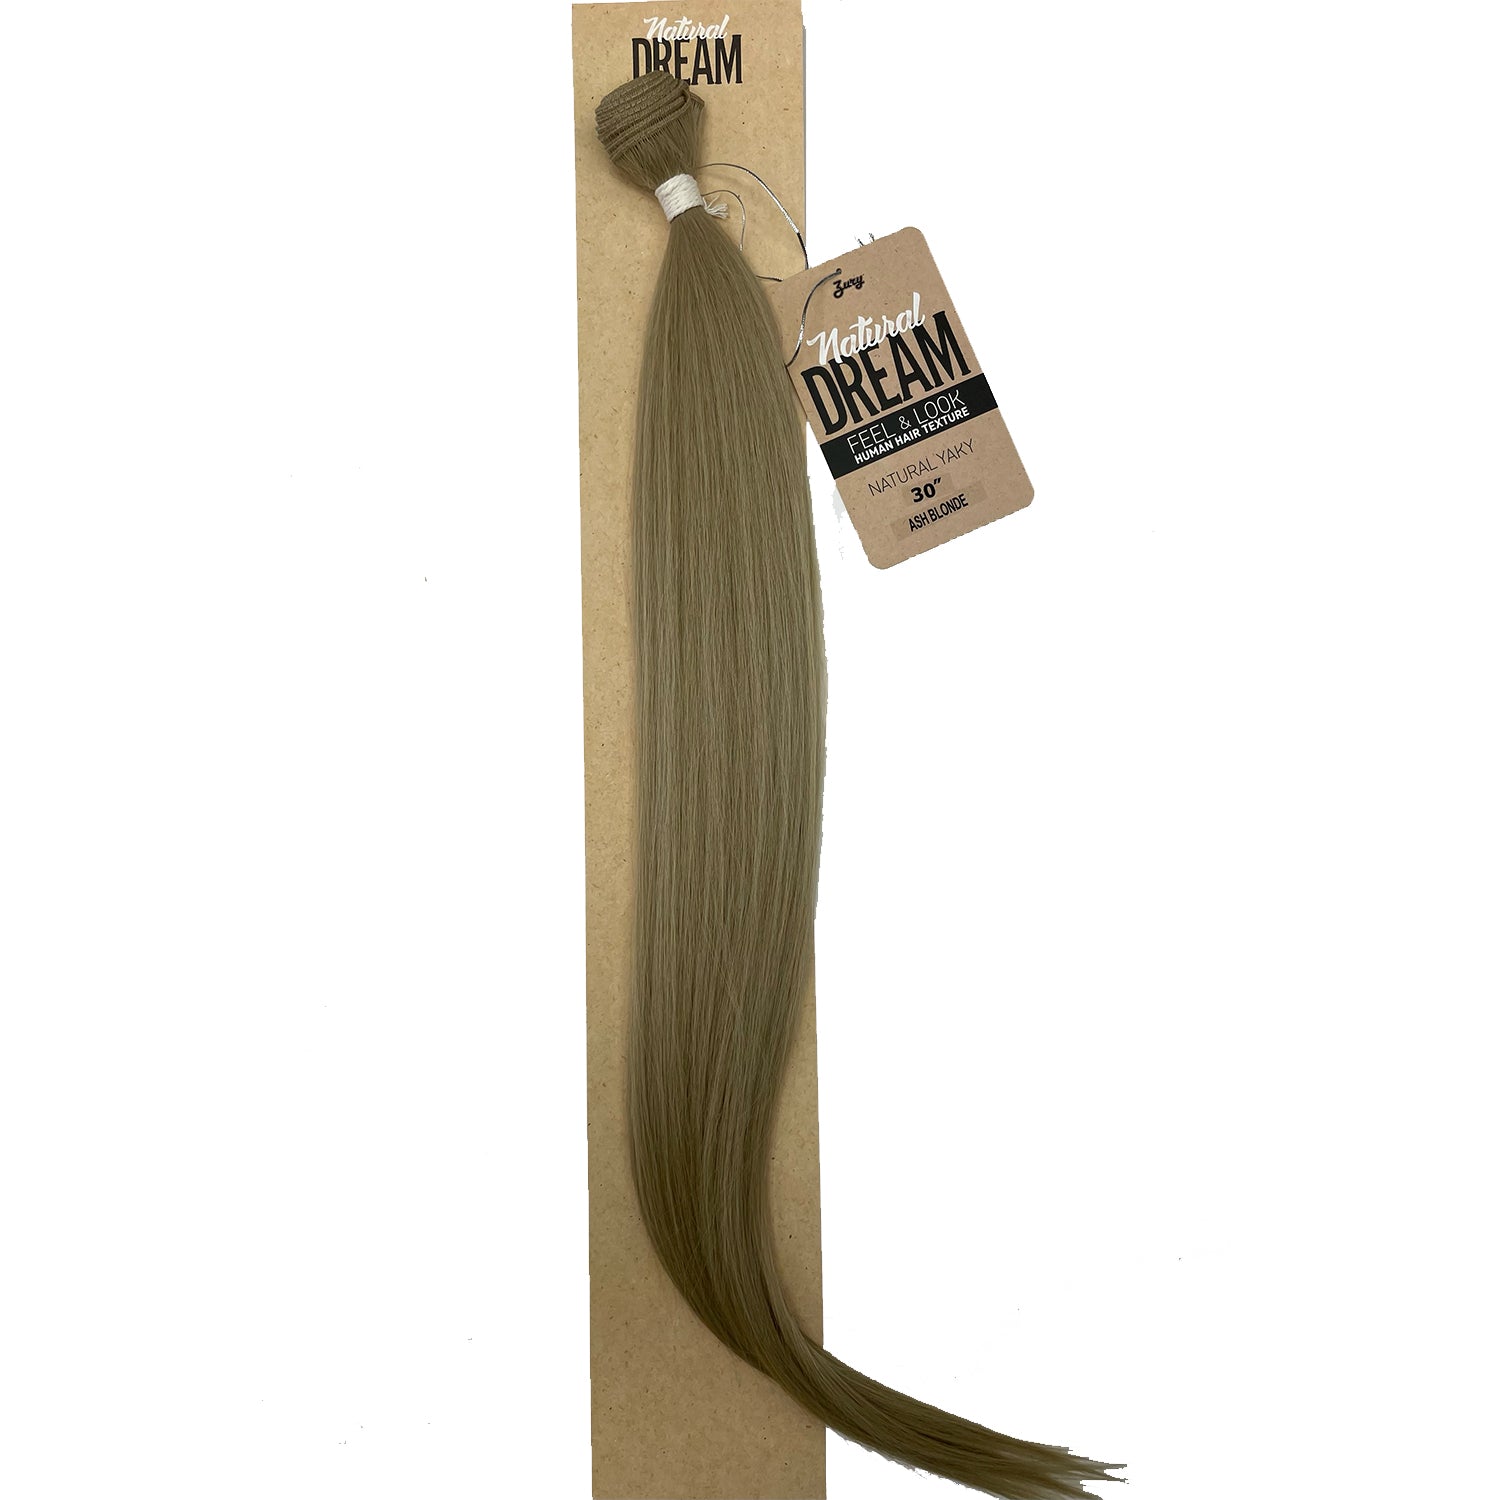 Zury Natural Dream Feel & Look Hair Extension Bundle, Natural Yaky 30" ash blonde